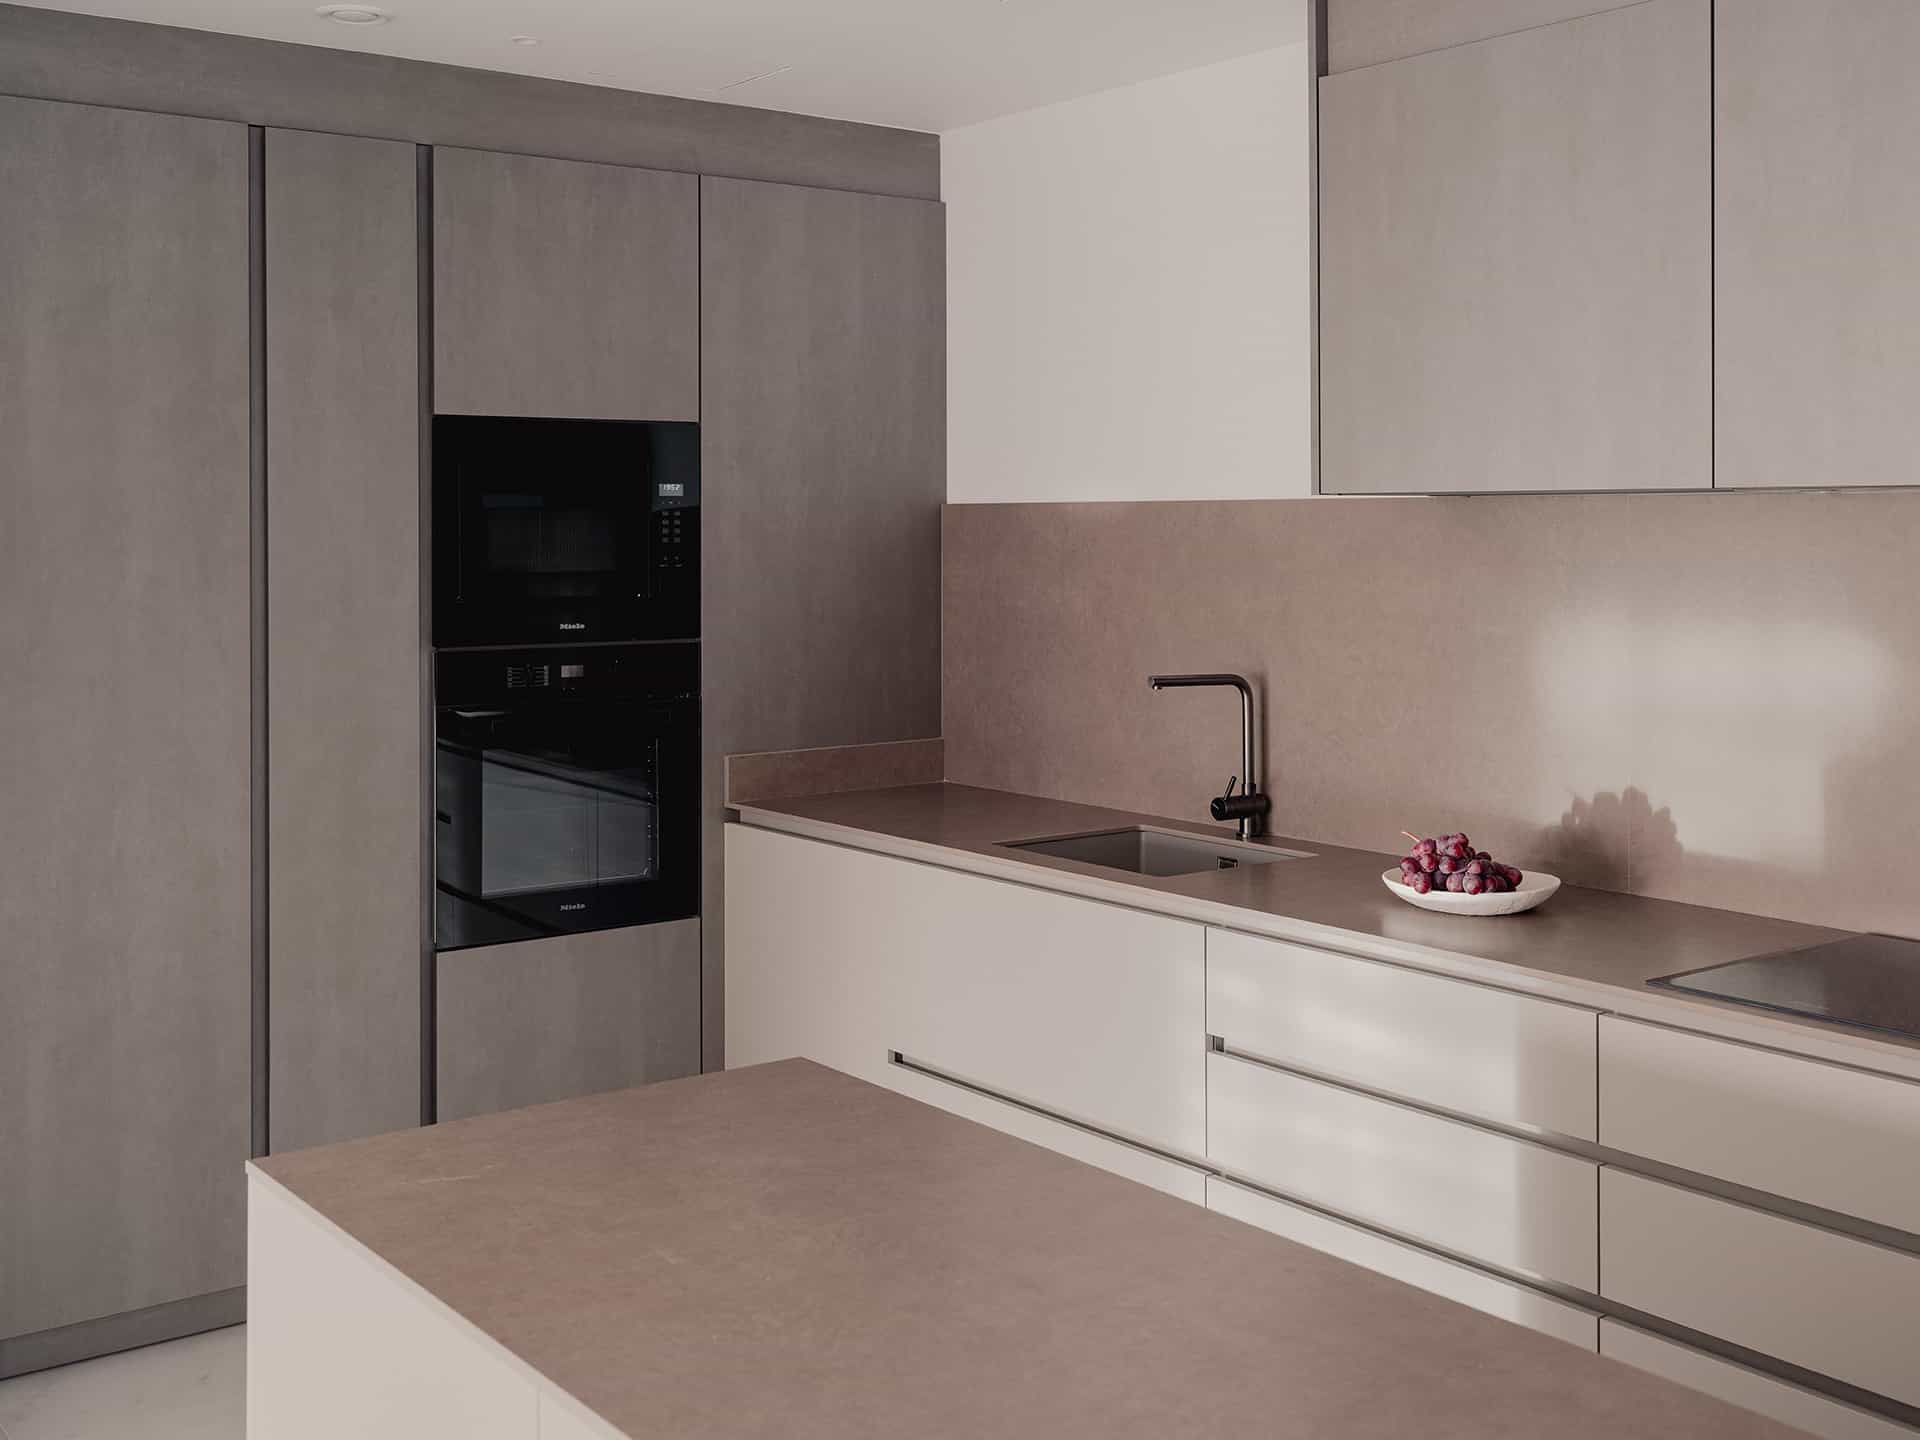 A kitchen that invites dialogue The kitchen area has been equipped with an open island to give continuity to the living room, thus establishing a dialogue between the two spaces. Warmth and elegance through oak and the use of innovative materials such as Corian used on countertops.More